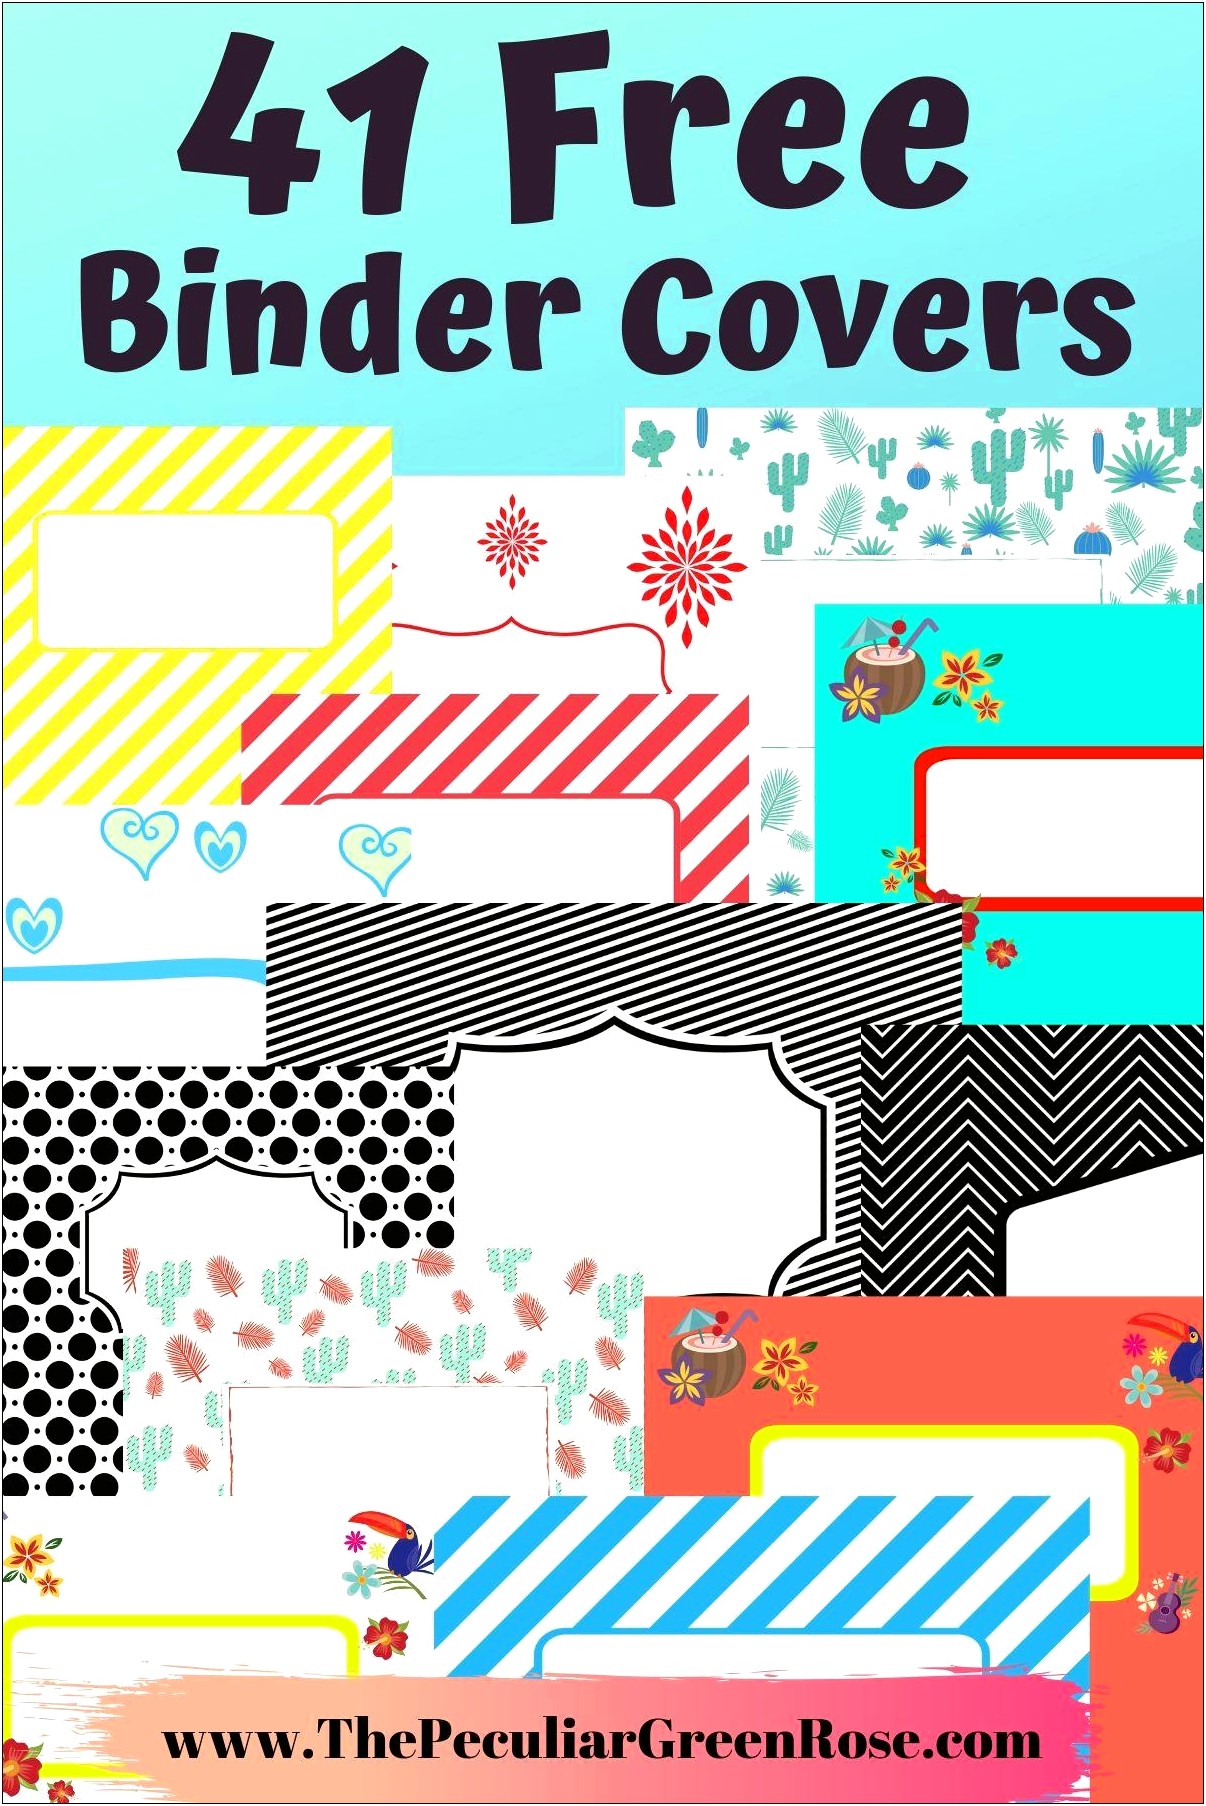 Binder Cover Sheet Template Free Professional